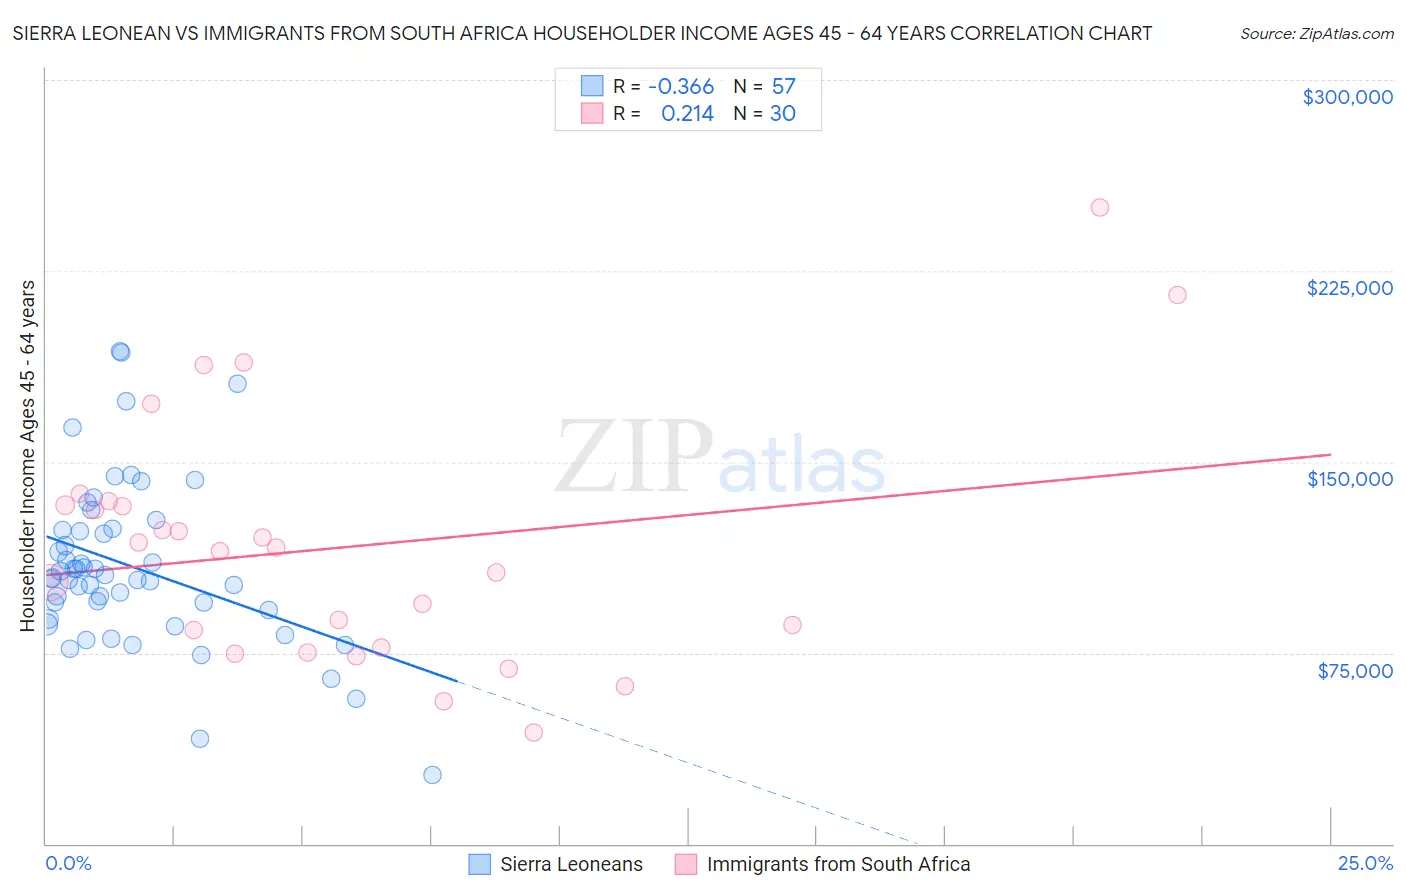 Sierra Leonean vs Immigrants from South Africa Householder Income Ages 45 - 64 years